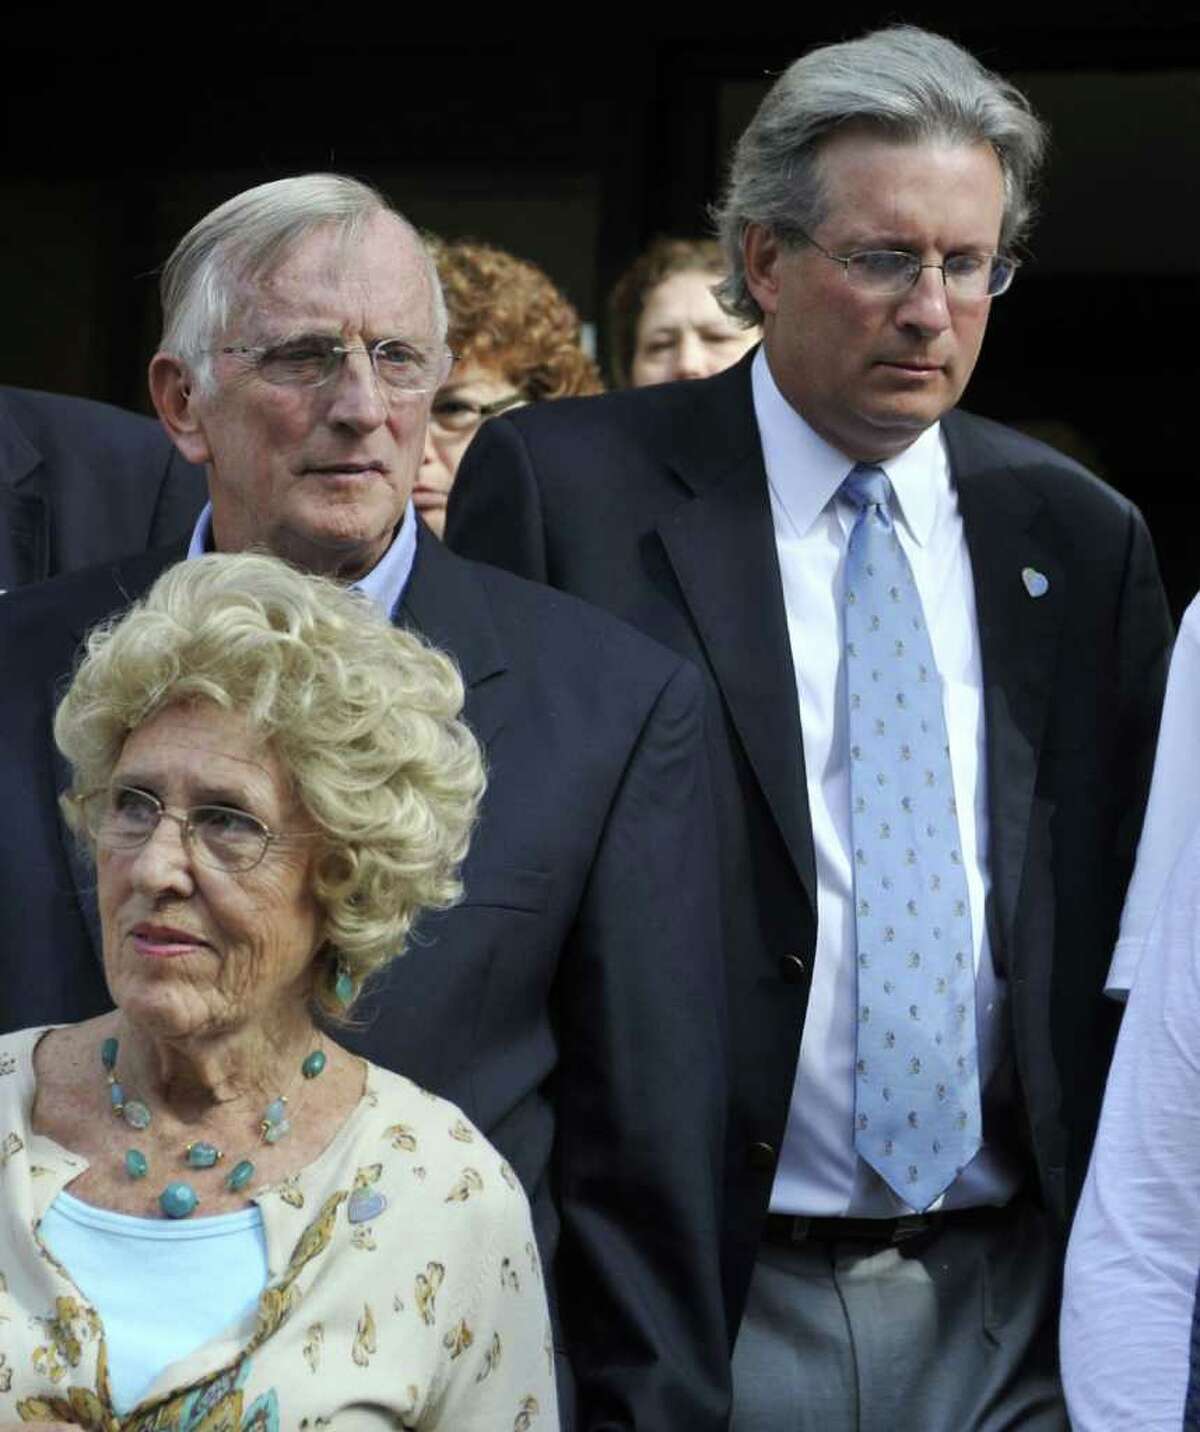 Dr. William Petit Jr., right, leaves court with his father, William Petit, left, and his mother-in-law Marybelle Hawke, bottom left, after the first day of the trial of Steven Hayes at Superior Court in New Haven, Conn., on Monday, Sept. 13, 2010. Prosecutors allege Hayes and Joshua Komisarjevsky killed Jennifer Hawke-Petit and her two daughters, 17-year-old Hayley and 11-year-old Michaela, in their Cheshire, Conn. home in July 2007. (AP Photo/Jessica Hill)